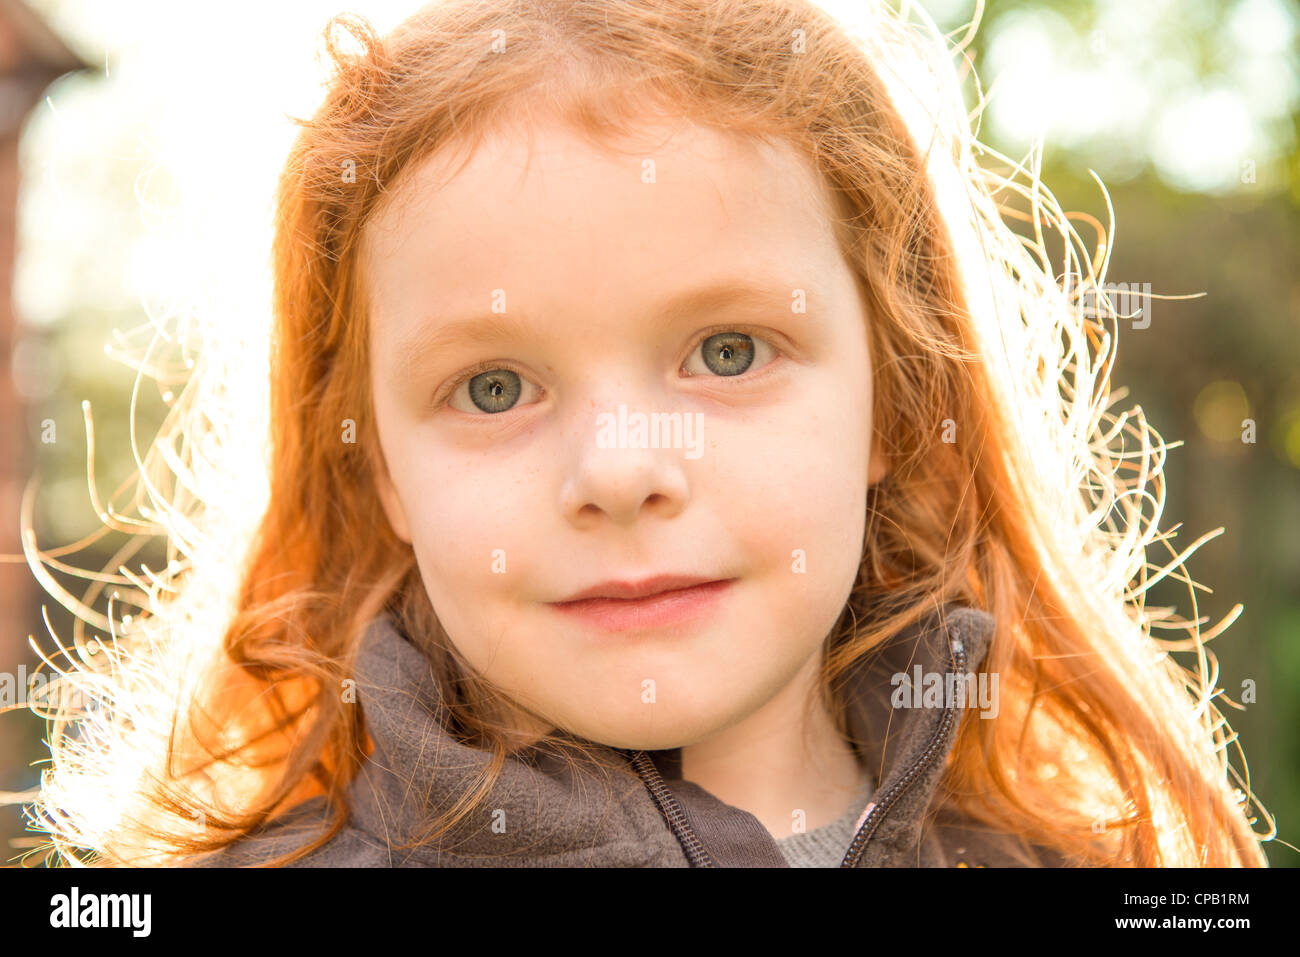 Little girl with ginger hair looking to camera in her summer garden Stock Photo